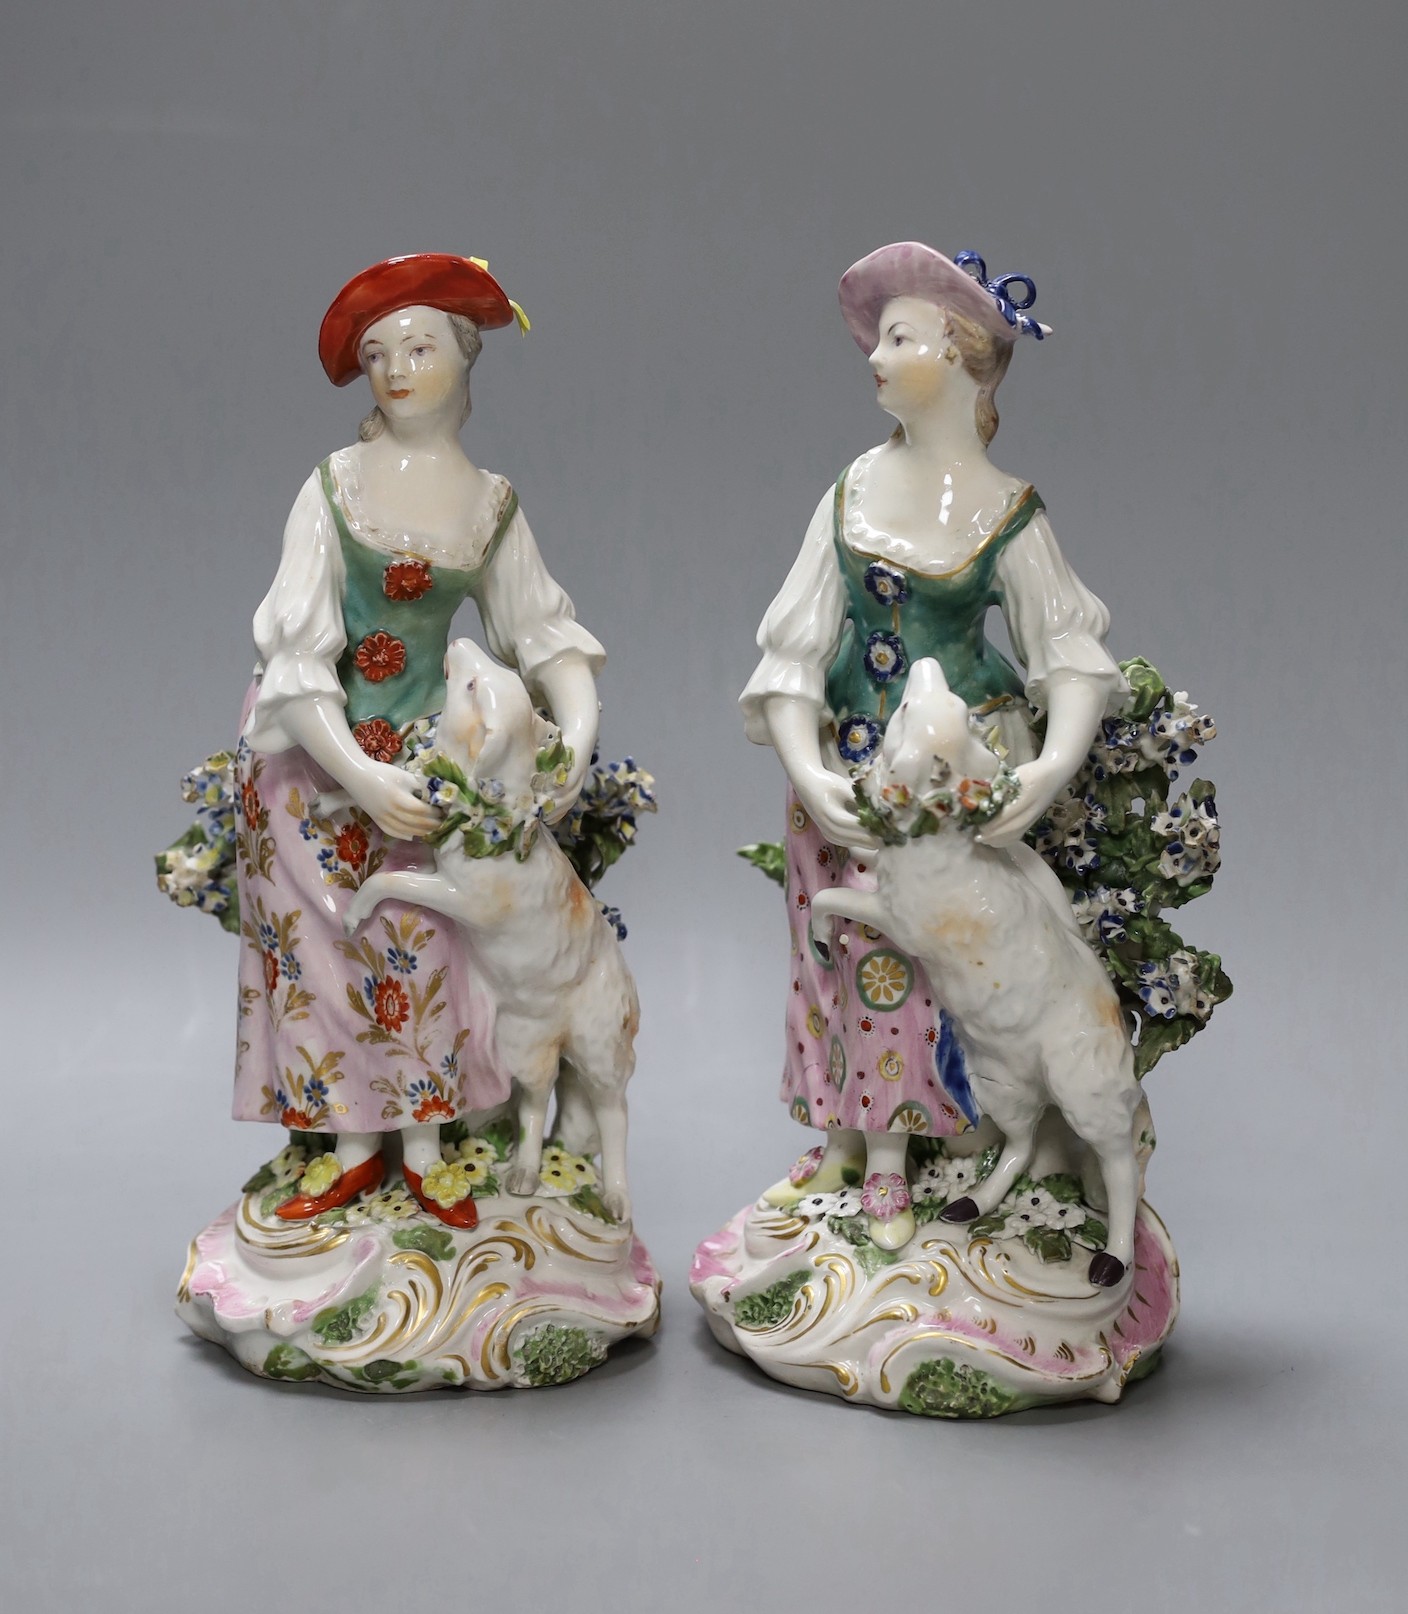 Two Derby groups of a shepherdess and a sheep, c.1765, 21 cms high